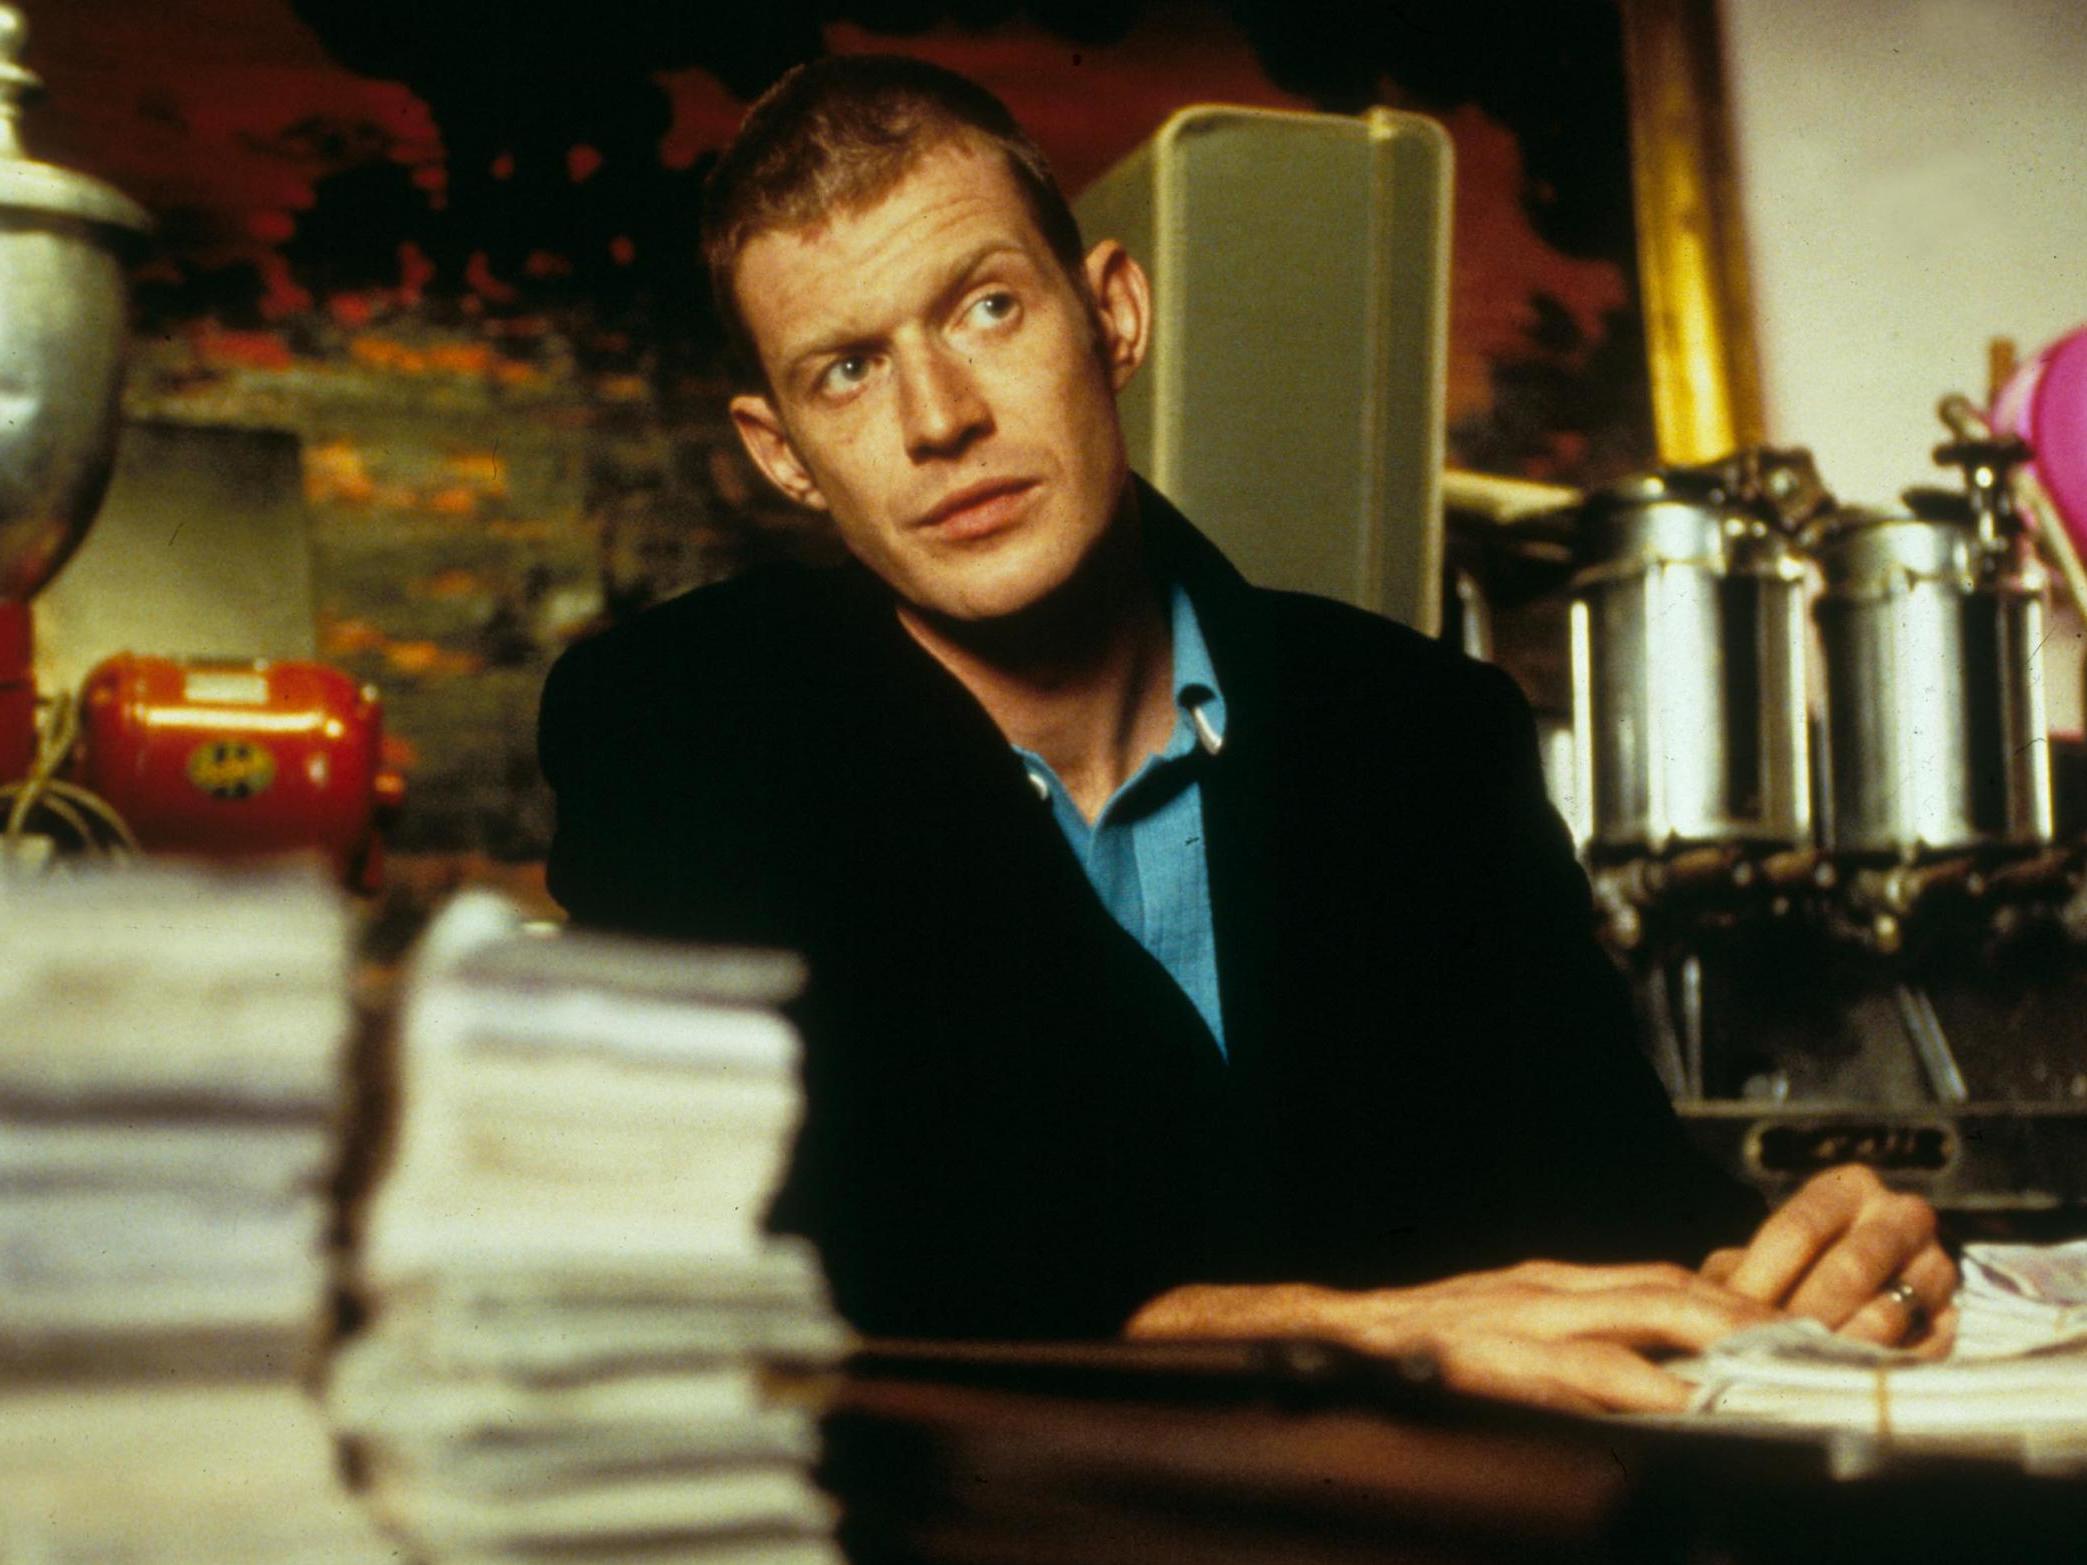 Flemyng played small-time criminal Tom in ‘Lock, Stock and Two Smoking Barrels’